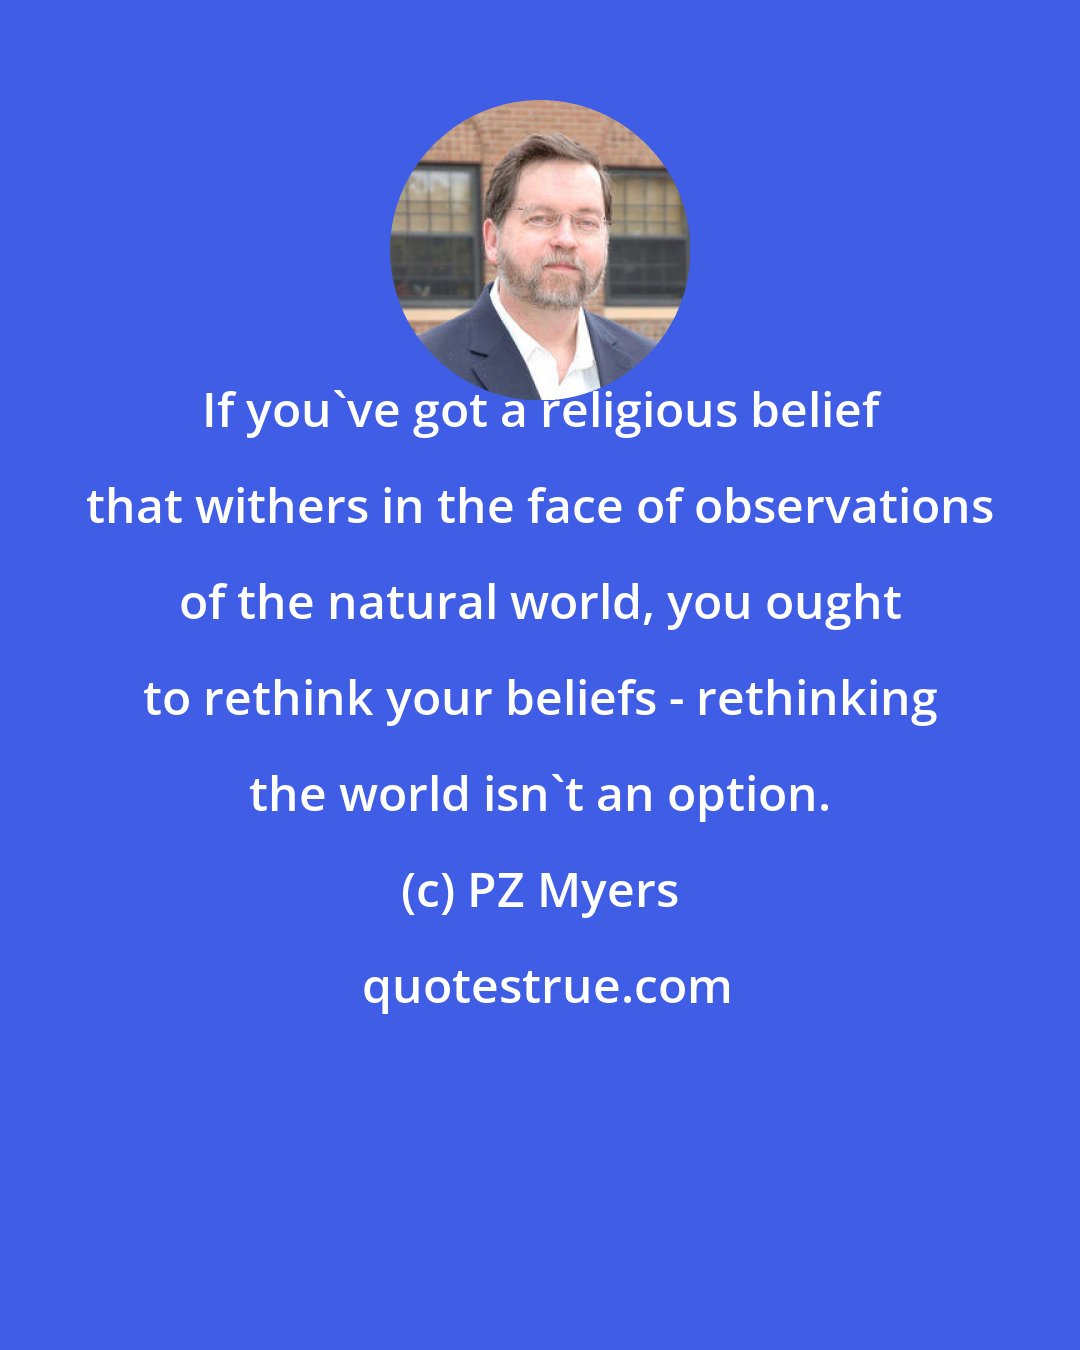 PZ Myers: If you've got a religious belief that withers in the face of observations of the natural world, you ought to rethink your beliefs - rethinking the world isn't an option.